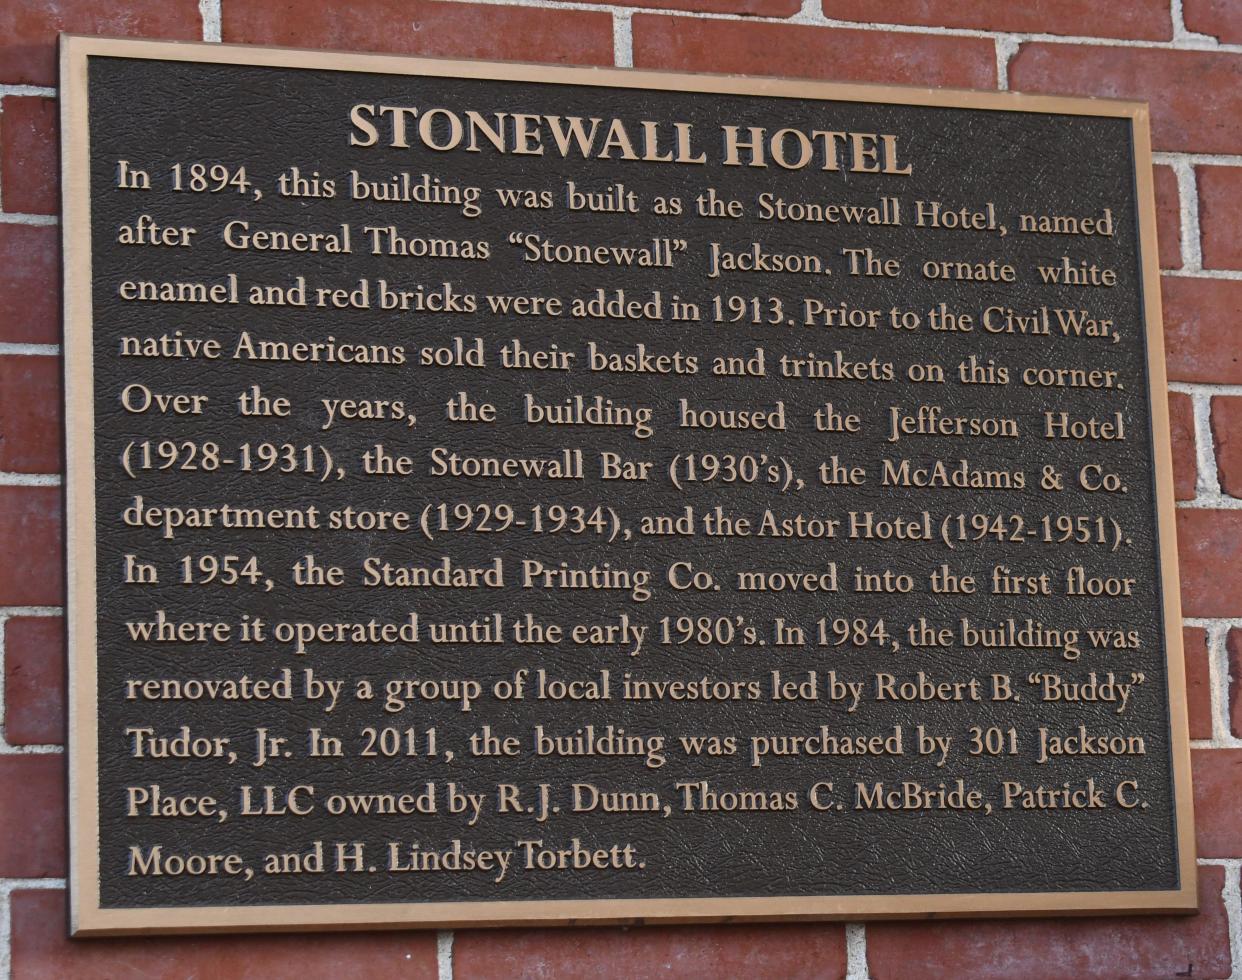 A plaque on the 301 Jackson Place building on the corner of 3rd and Jackson Streets in downtown Alexandria tells a brief history of the building that is reputed to be the oldest known commercial structure in downtown Alexandria, said attorney Thomas McBride.